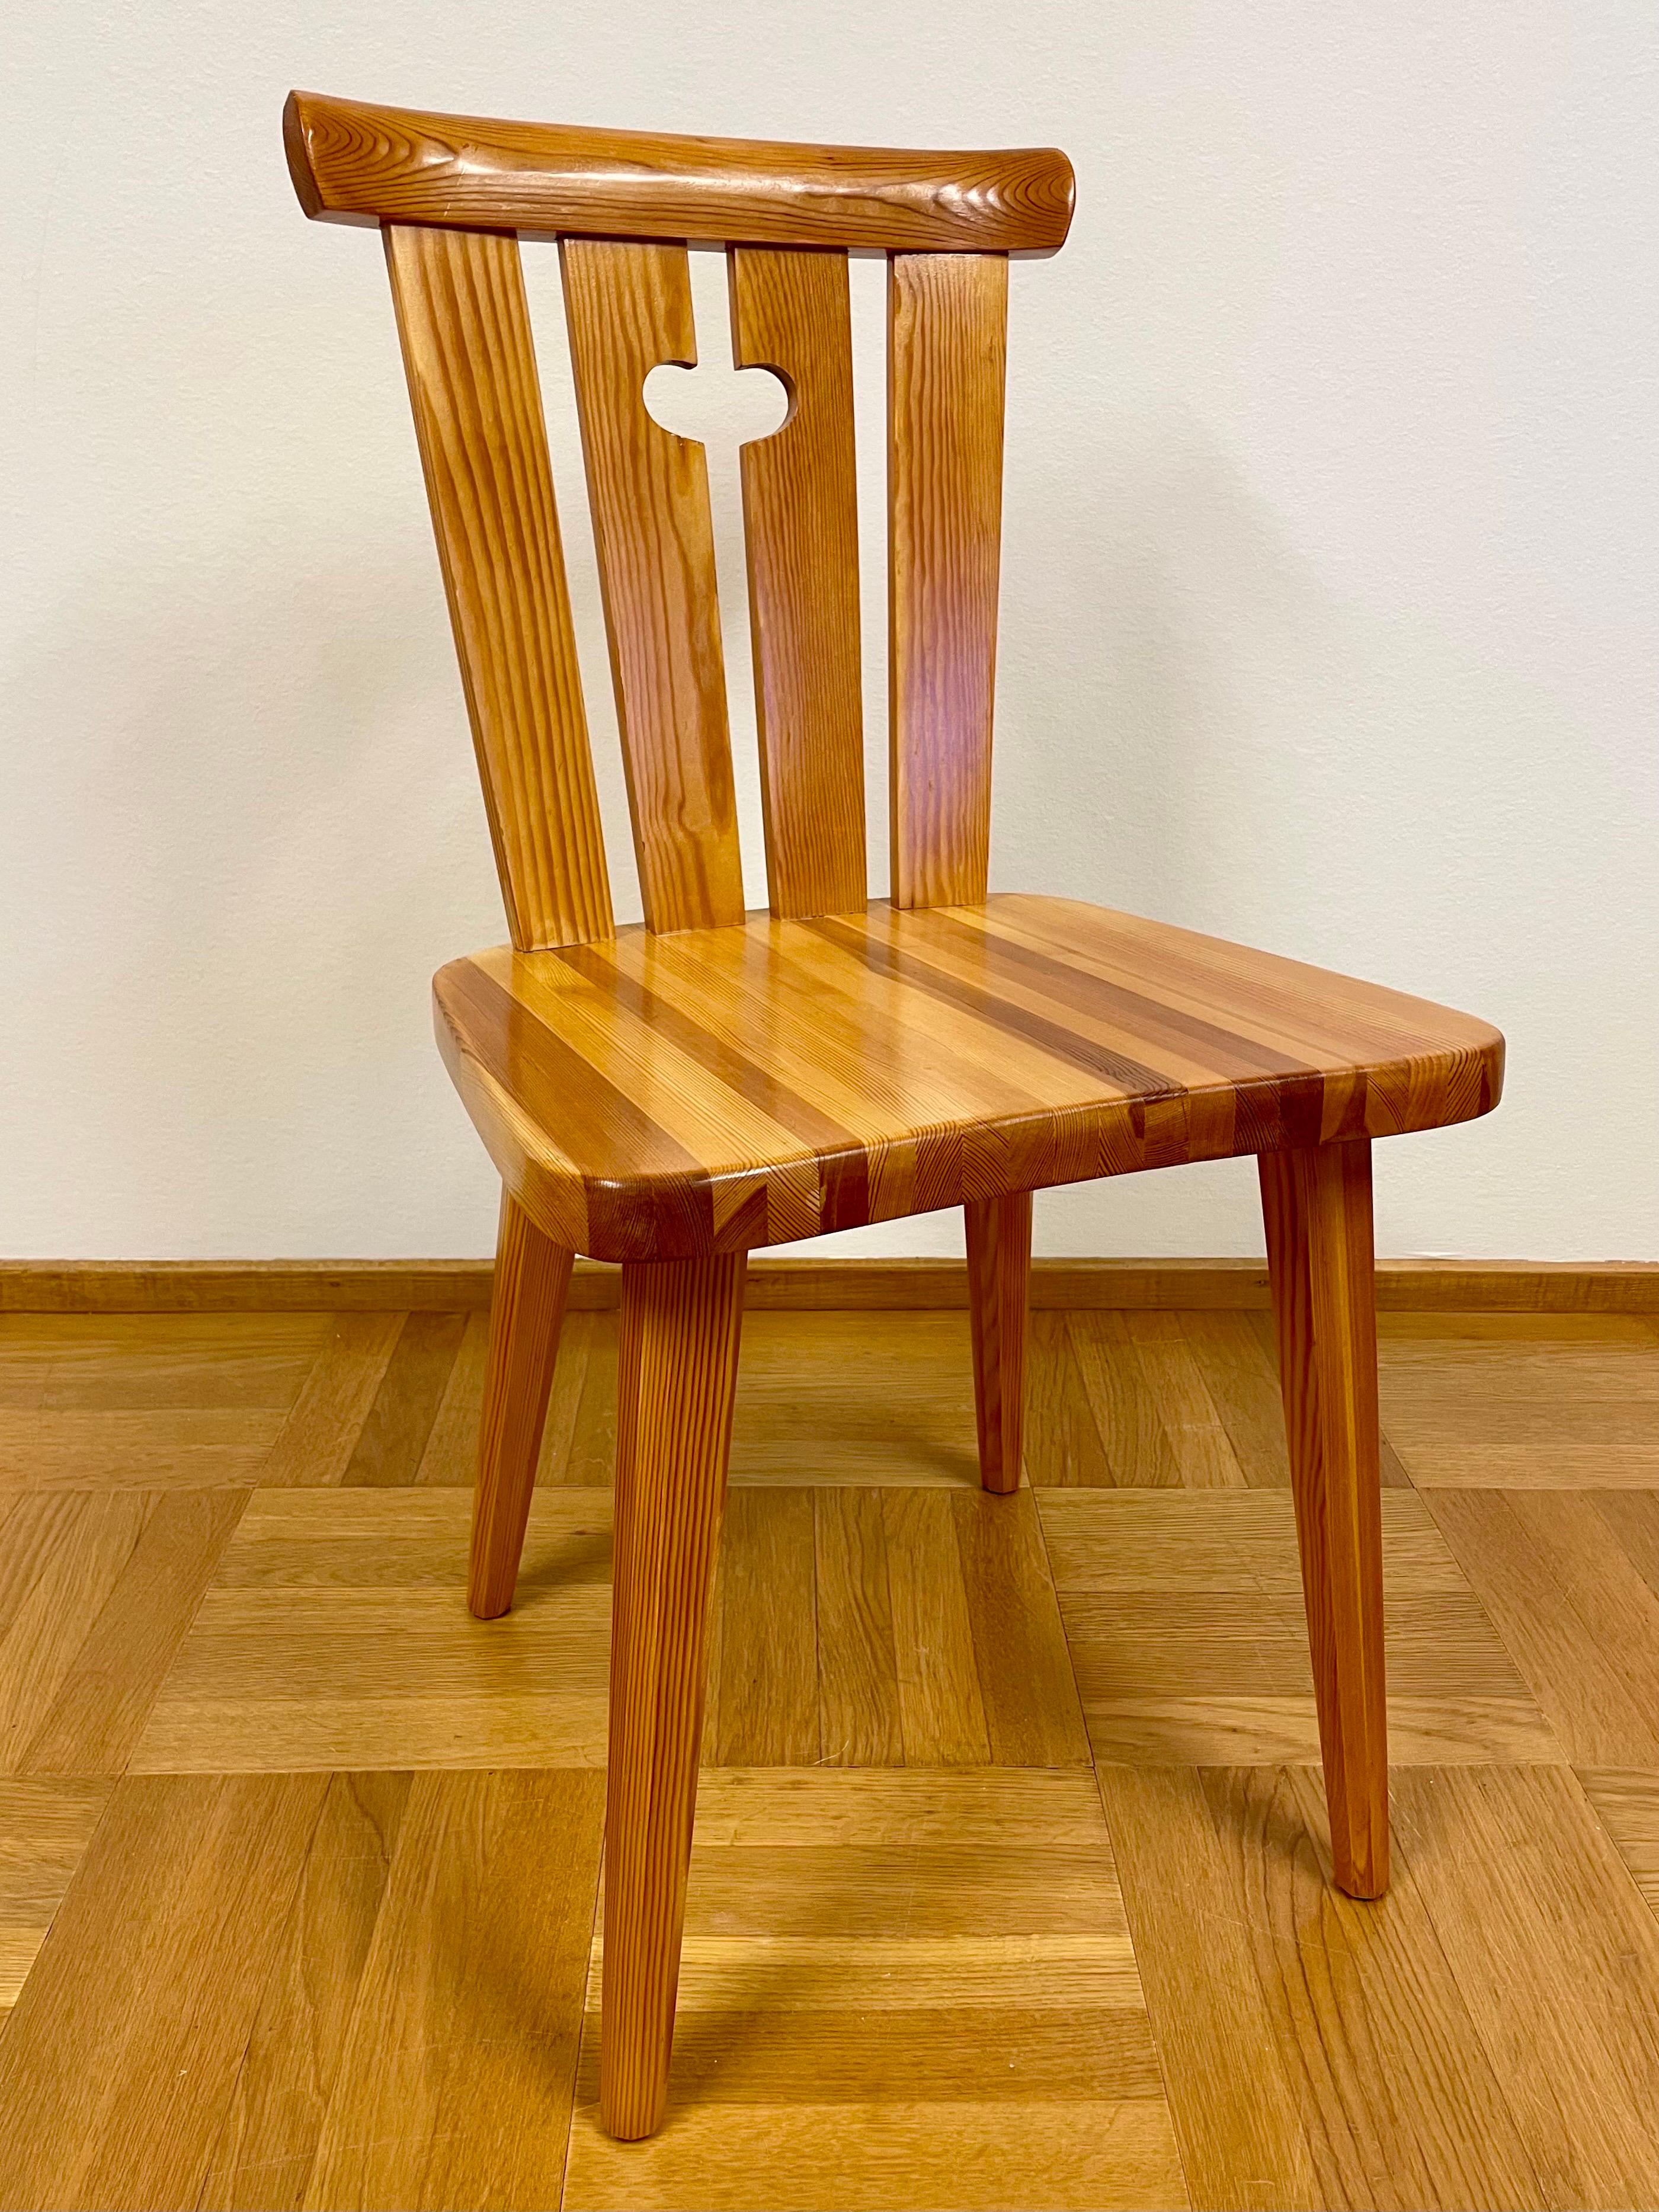 Swedish Mid 20th Pine Chairs Set by Göran Malmvall for Karl Andersson & Söner For Sale 2